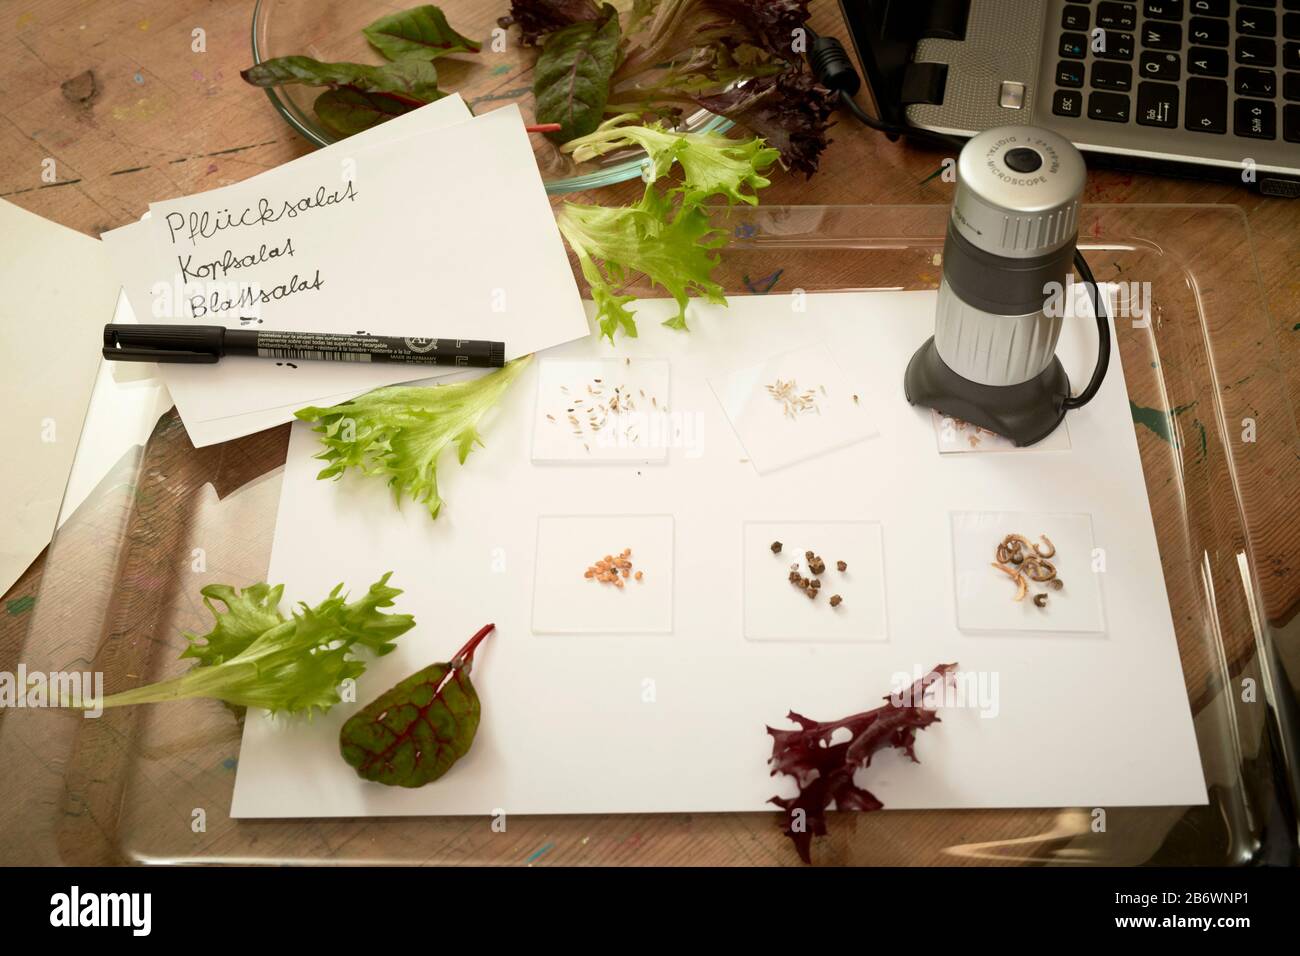 Children investigating food. Salad and lettuce seeds, ready for examination under a microscope. Learning according to the Reggio Pedagogy principle, playful understanding and discovery. Germany Stock Photo